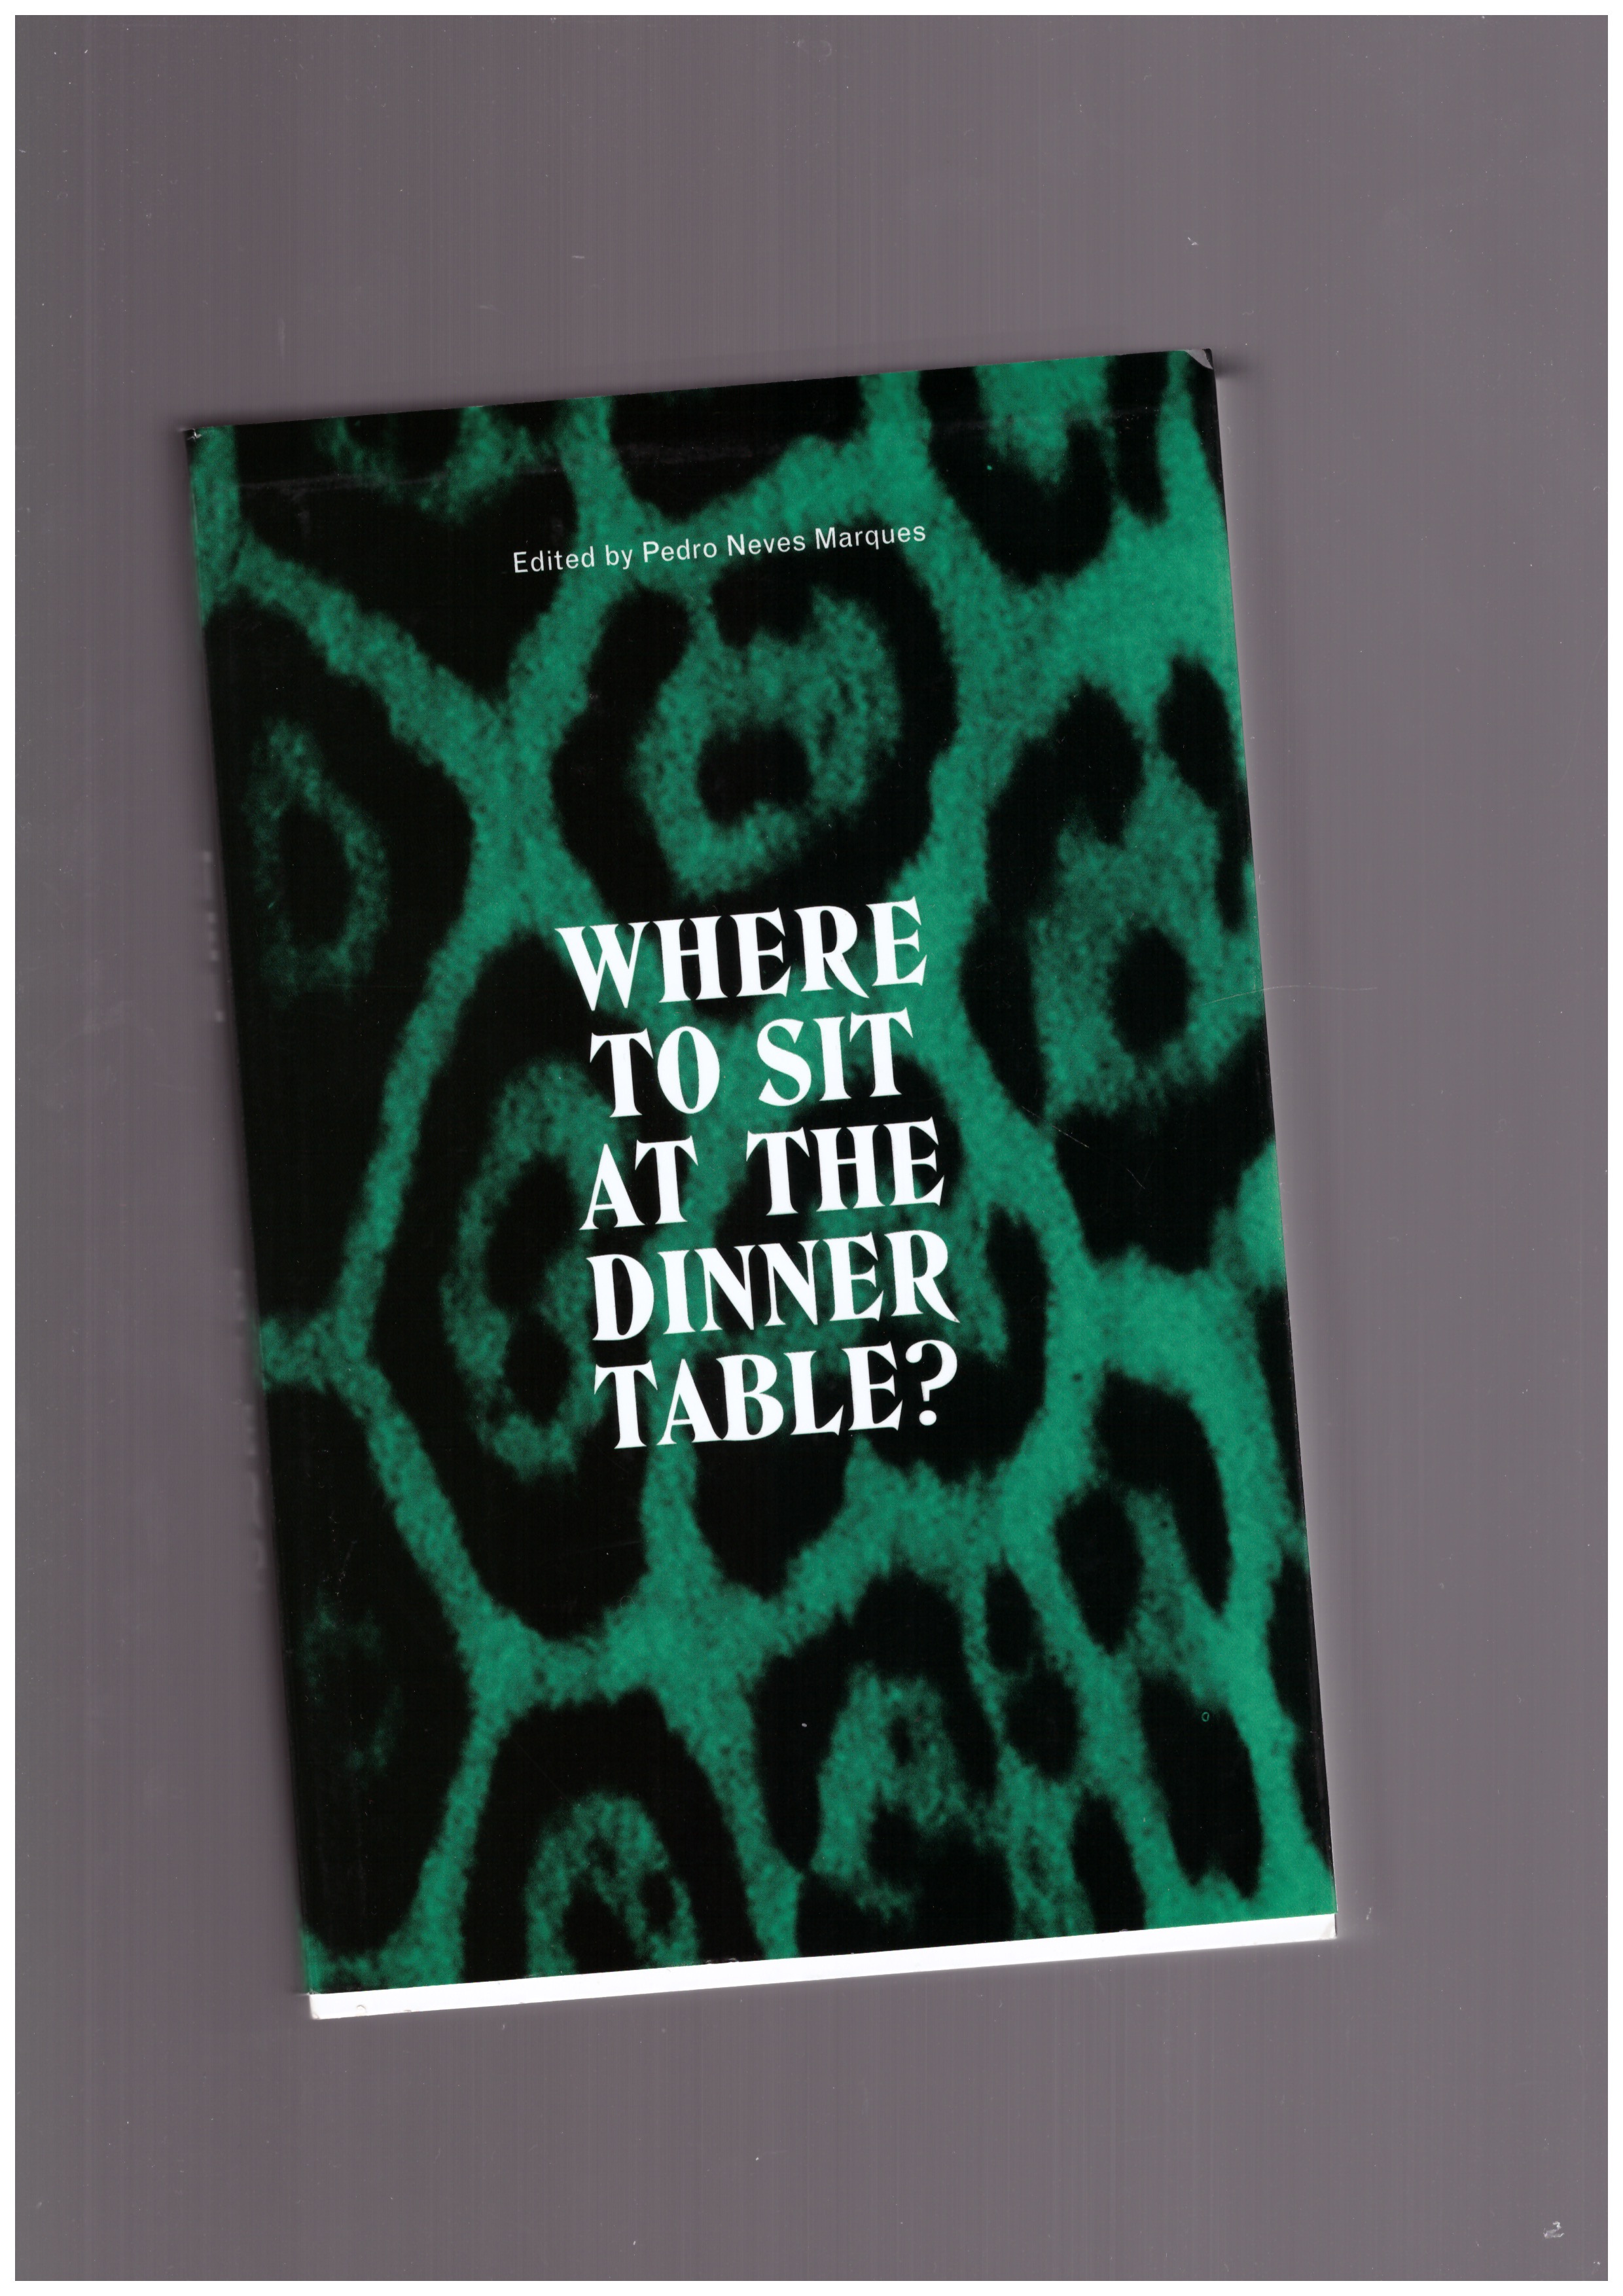 MARQUES, Pedro Neves - Where to Sit at the Dinner Table? The Forest & the School